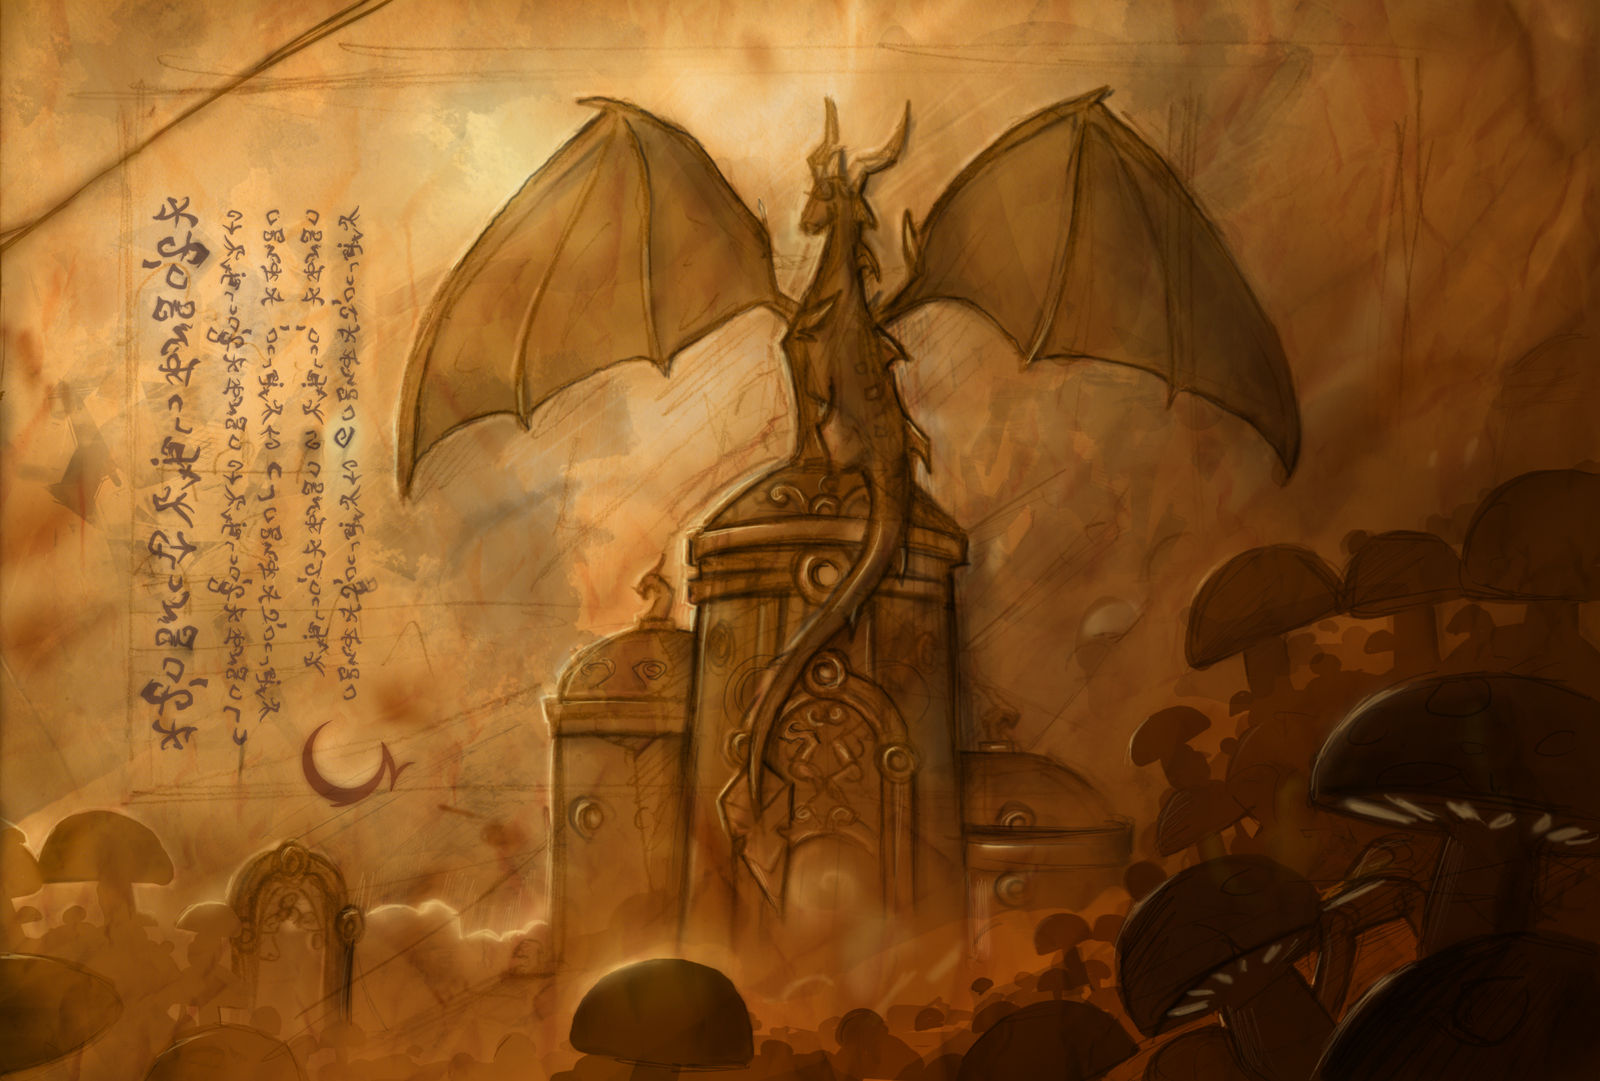 Sepia artwork of a massive aether dragon perched on the roof of a temple. Dragon writing can be seen on the left side of the page.